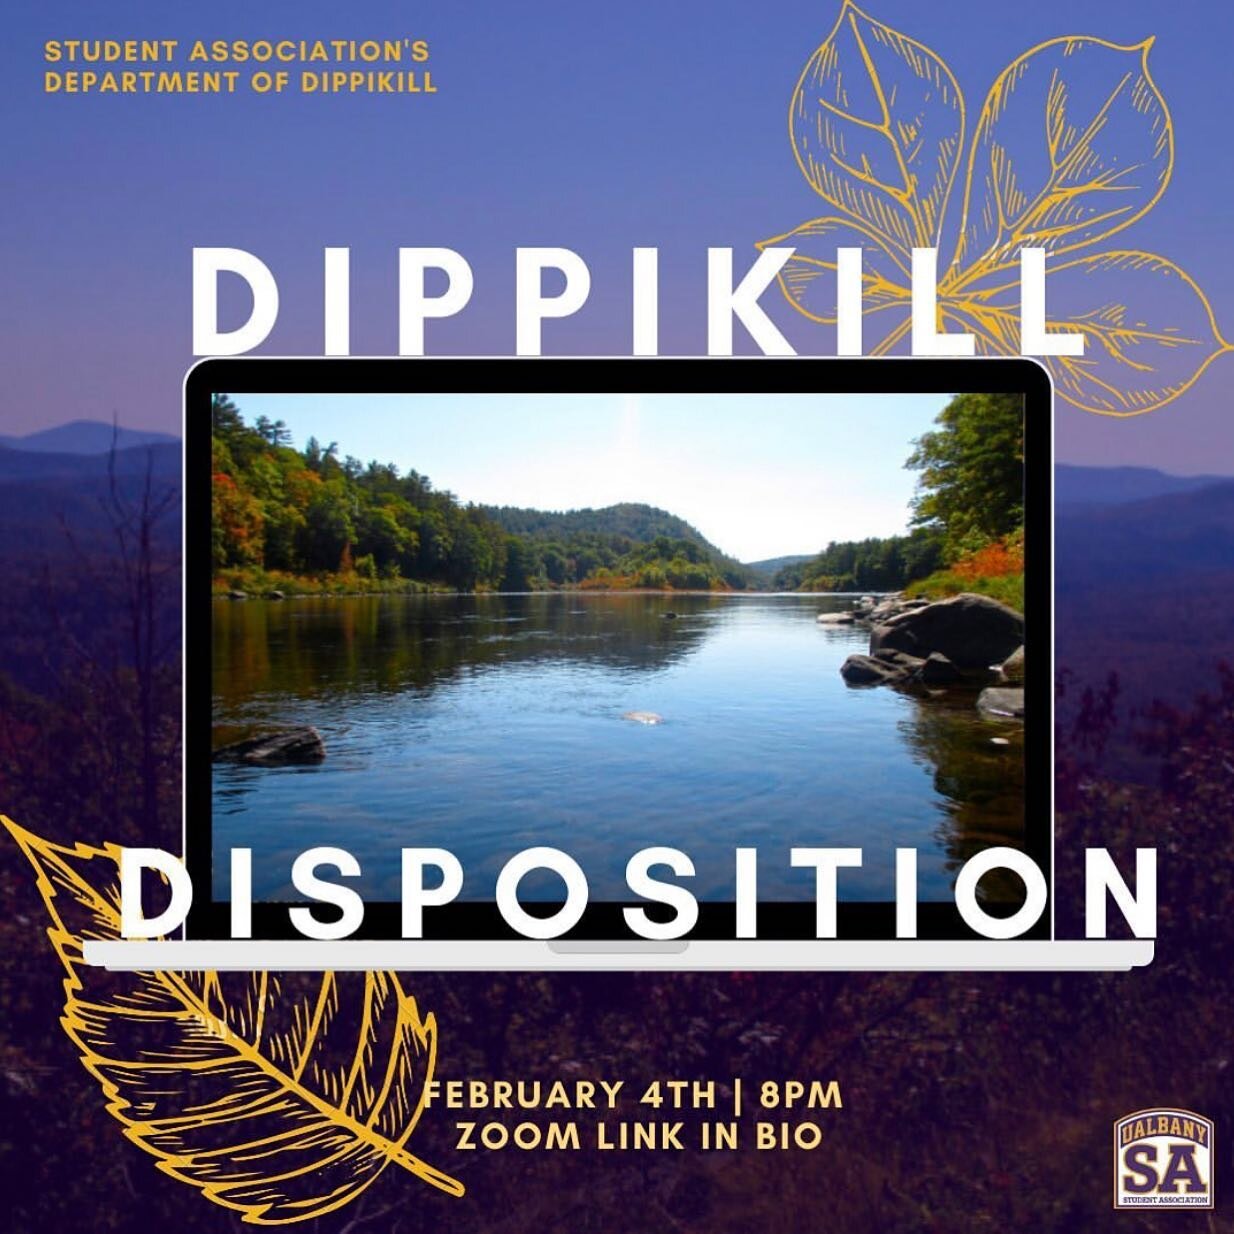 Have you always wanted to go to Dippikill but just didn&rsquo;t know how? Are you a student group interested in bonding with your members ? Make sure you join our Director Rae @raebelle_ on Zoom this THURSDAY to learn more and ask all your burning qu